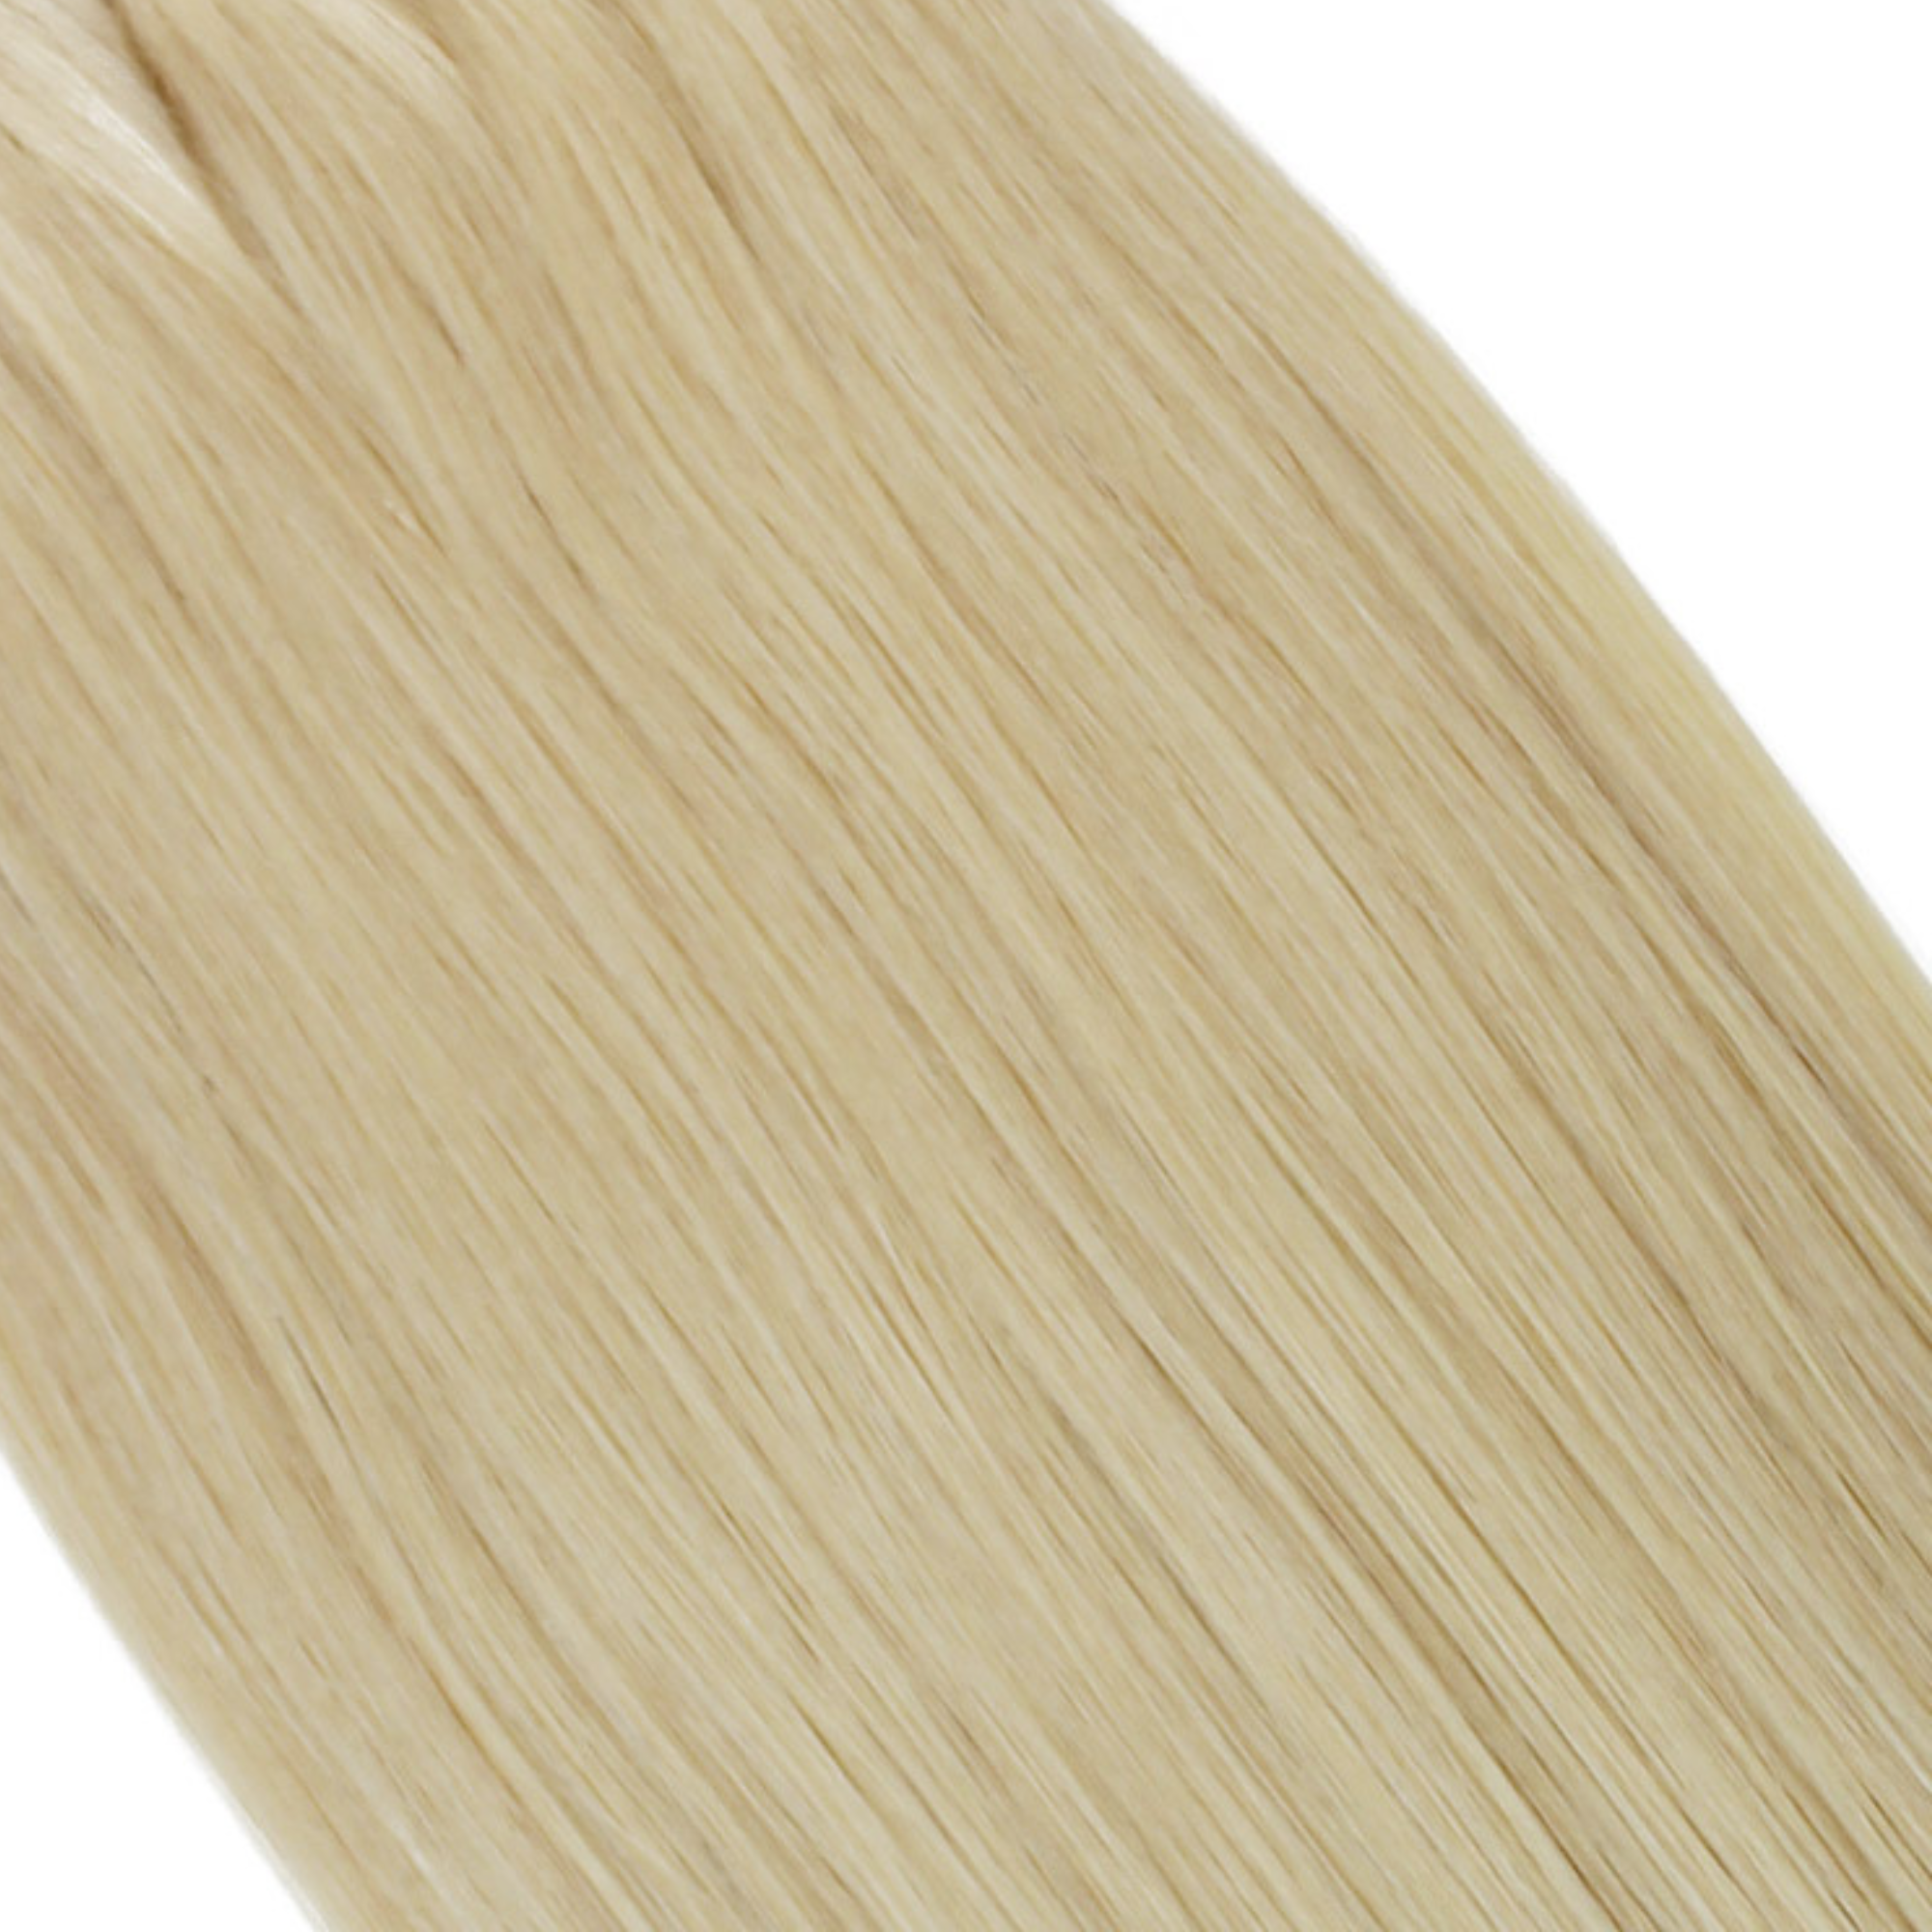 "hair rehab london 18" tape hair extensions shade swatch titled platinum"